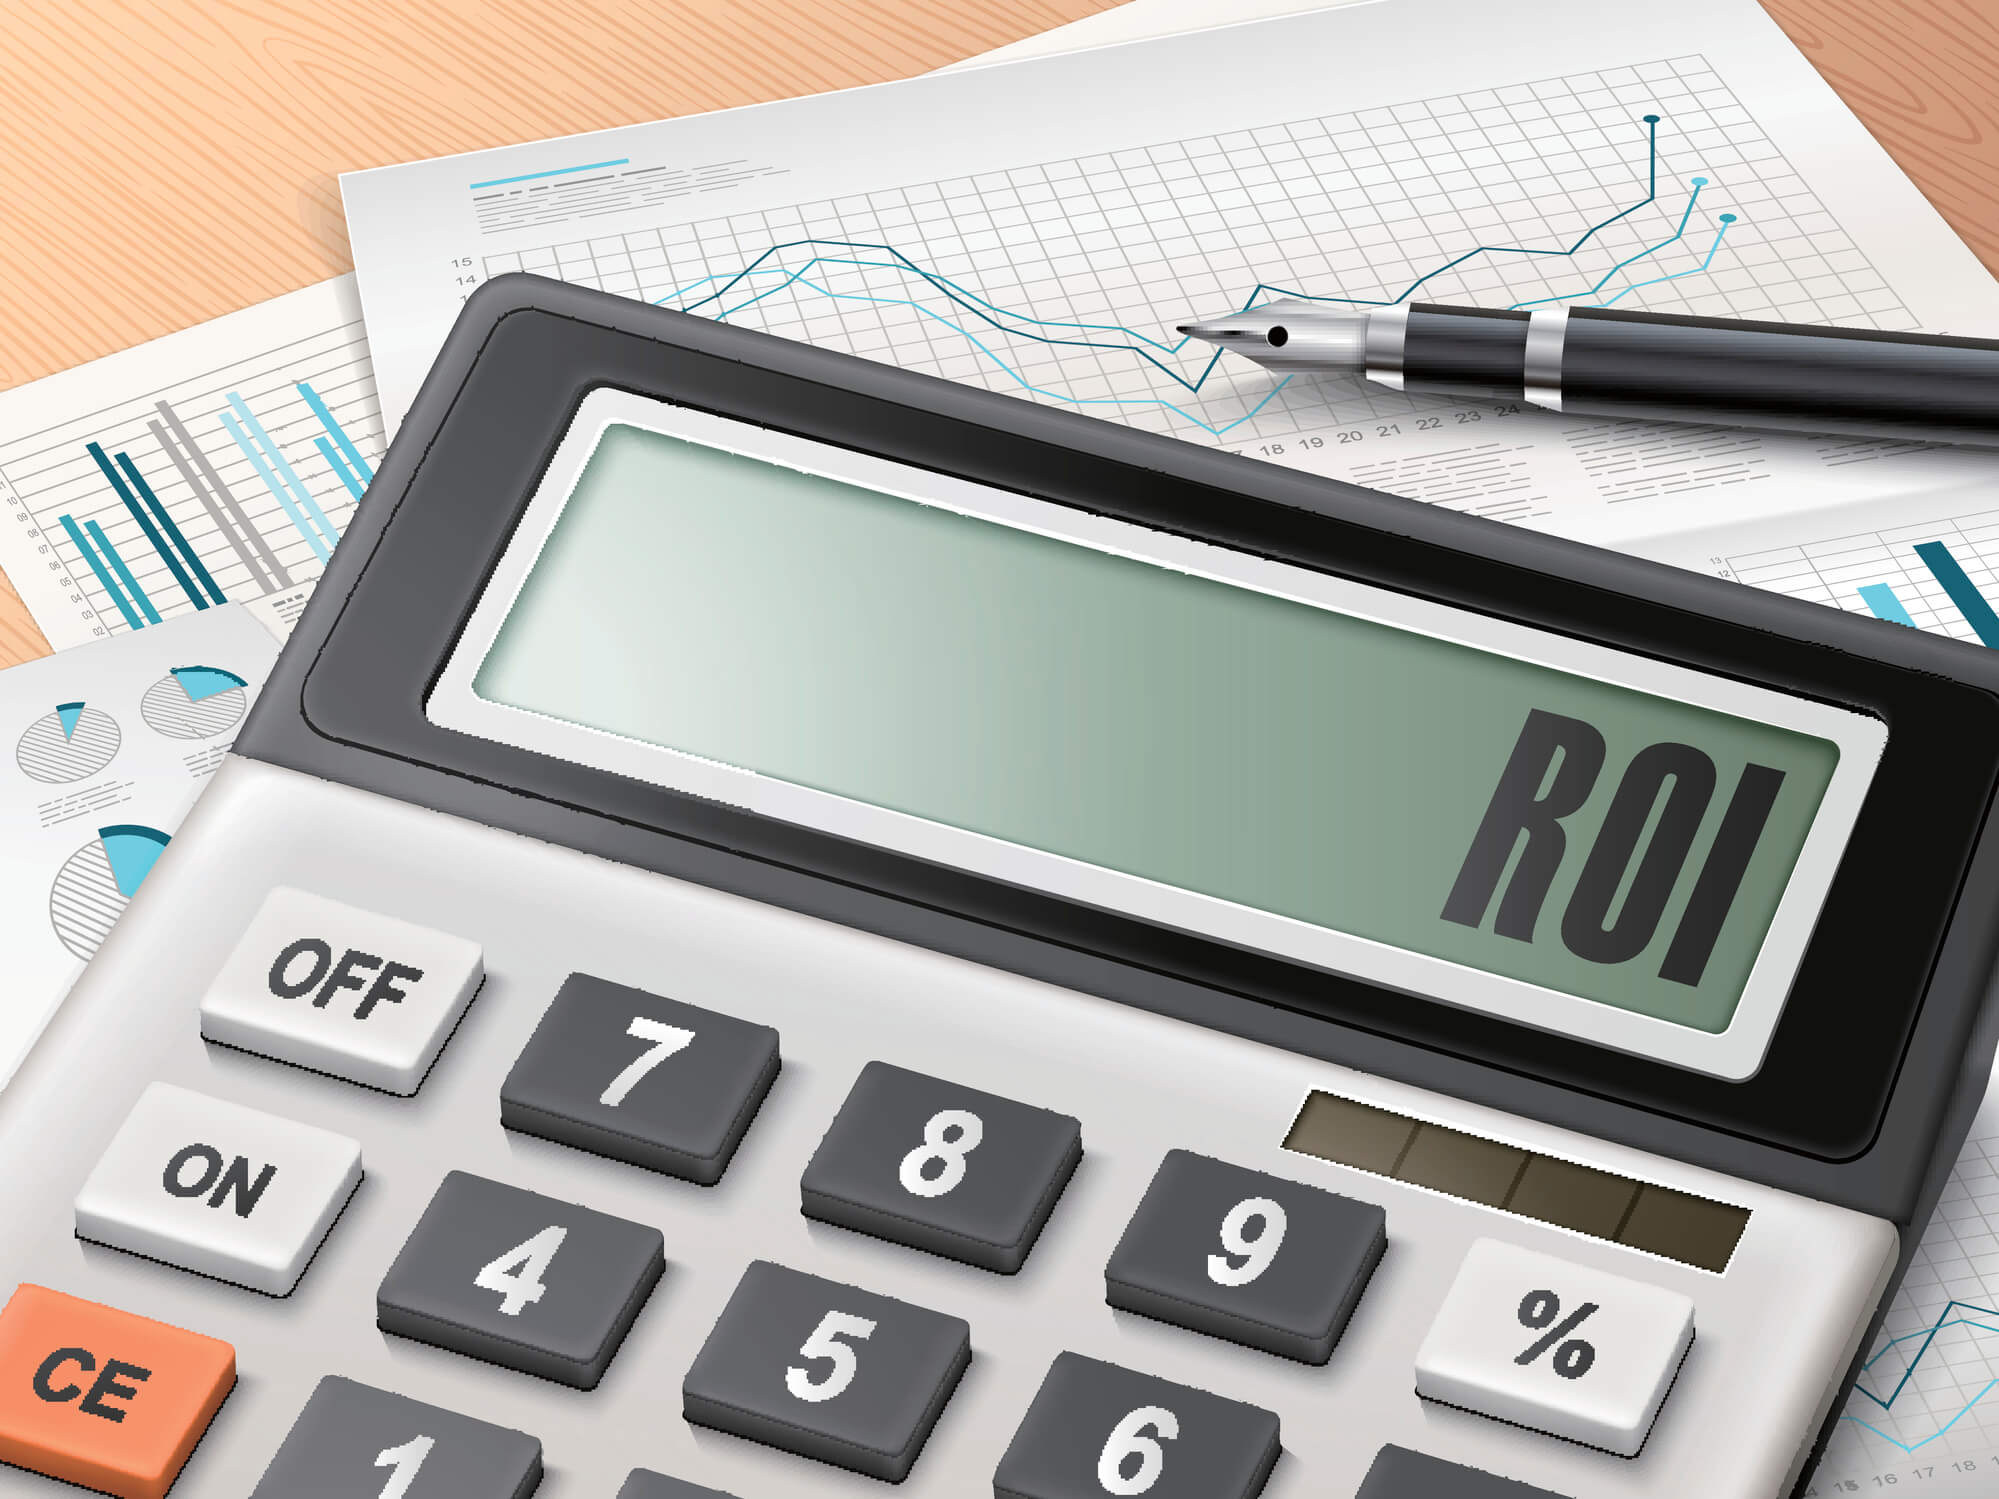 Many Happy ‘Returns’: Sphera Launches New ROI Calculator for Operational Risk Management